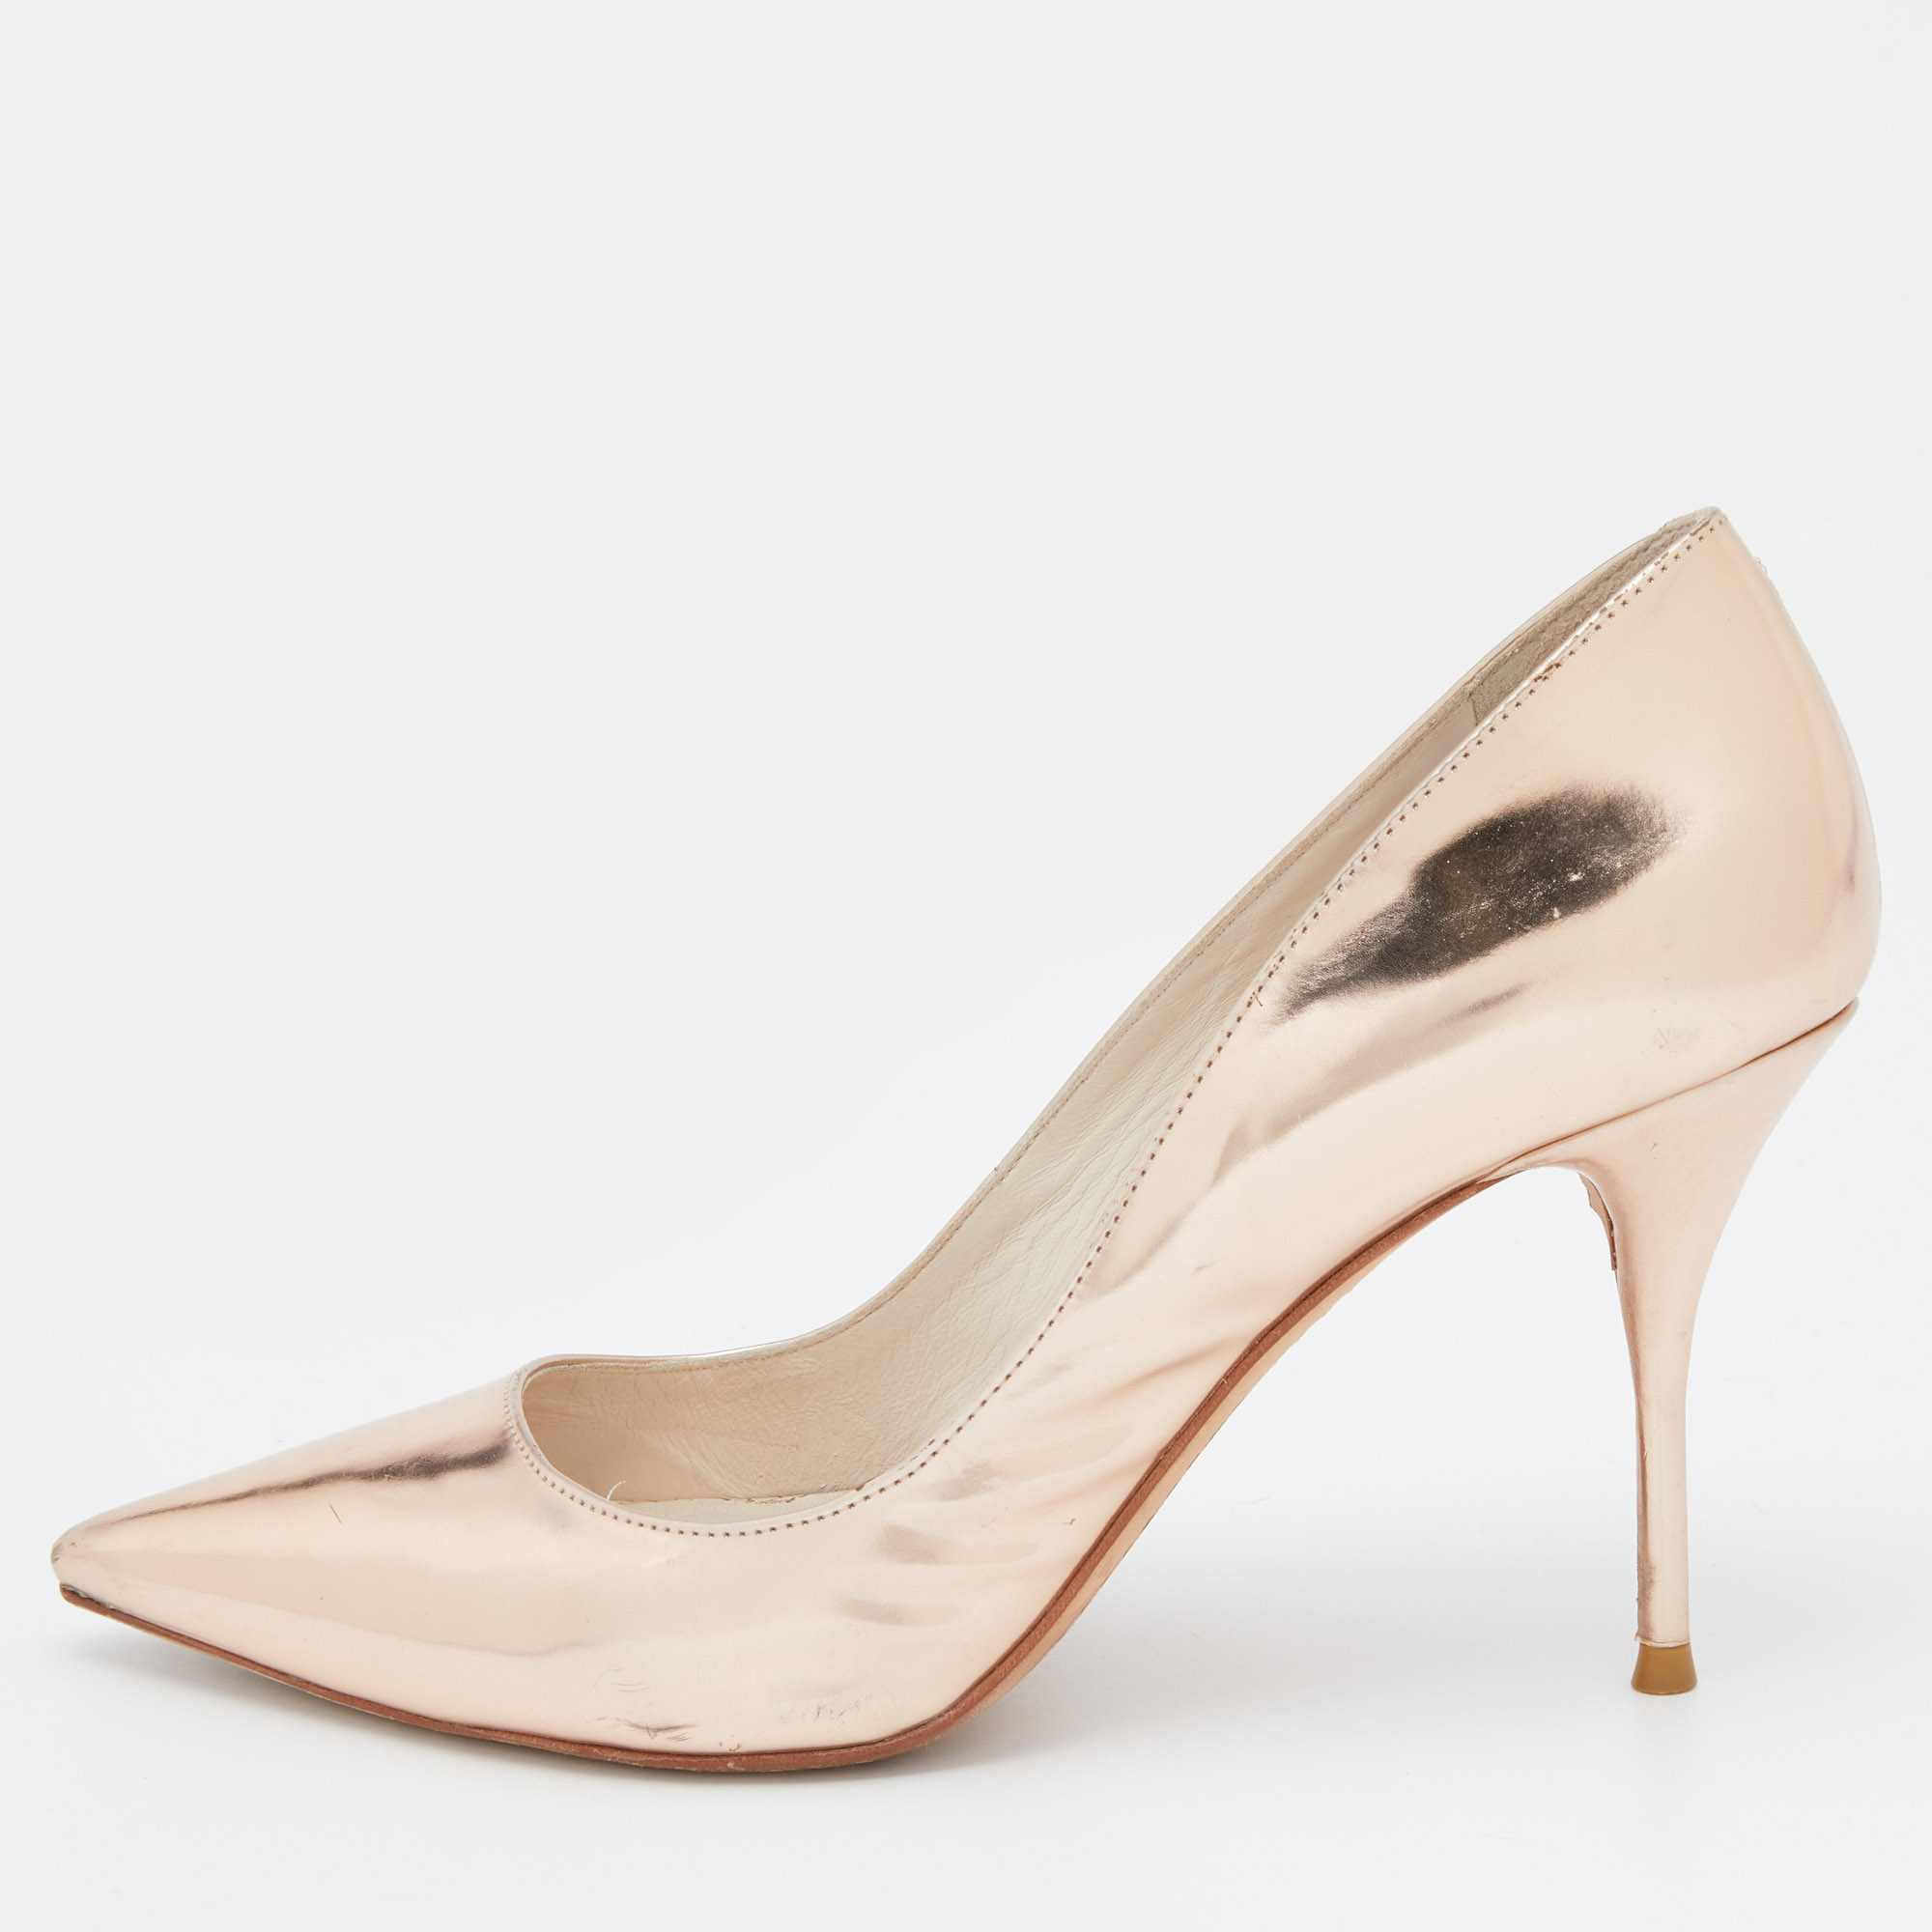 Pre-owned Sophia Webster Metallic Rose Gold Leather Coco Flamingo Pointed Toe Pumps Size 38.5